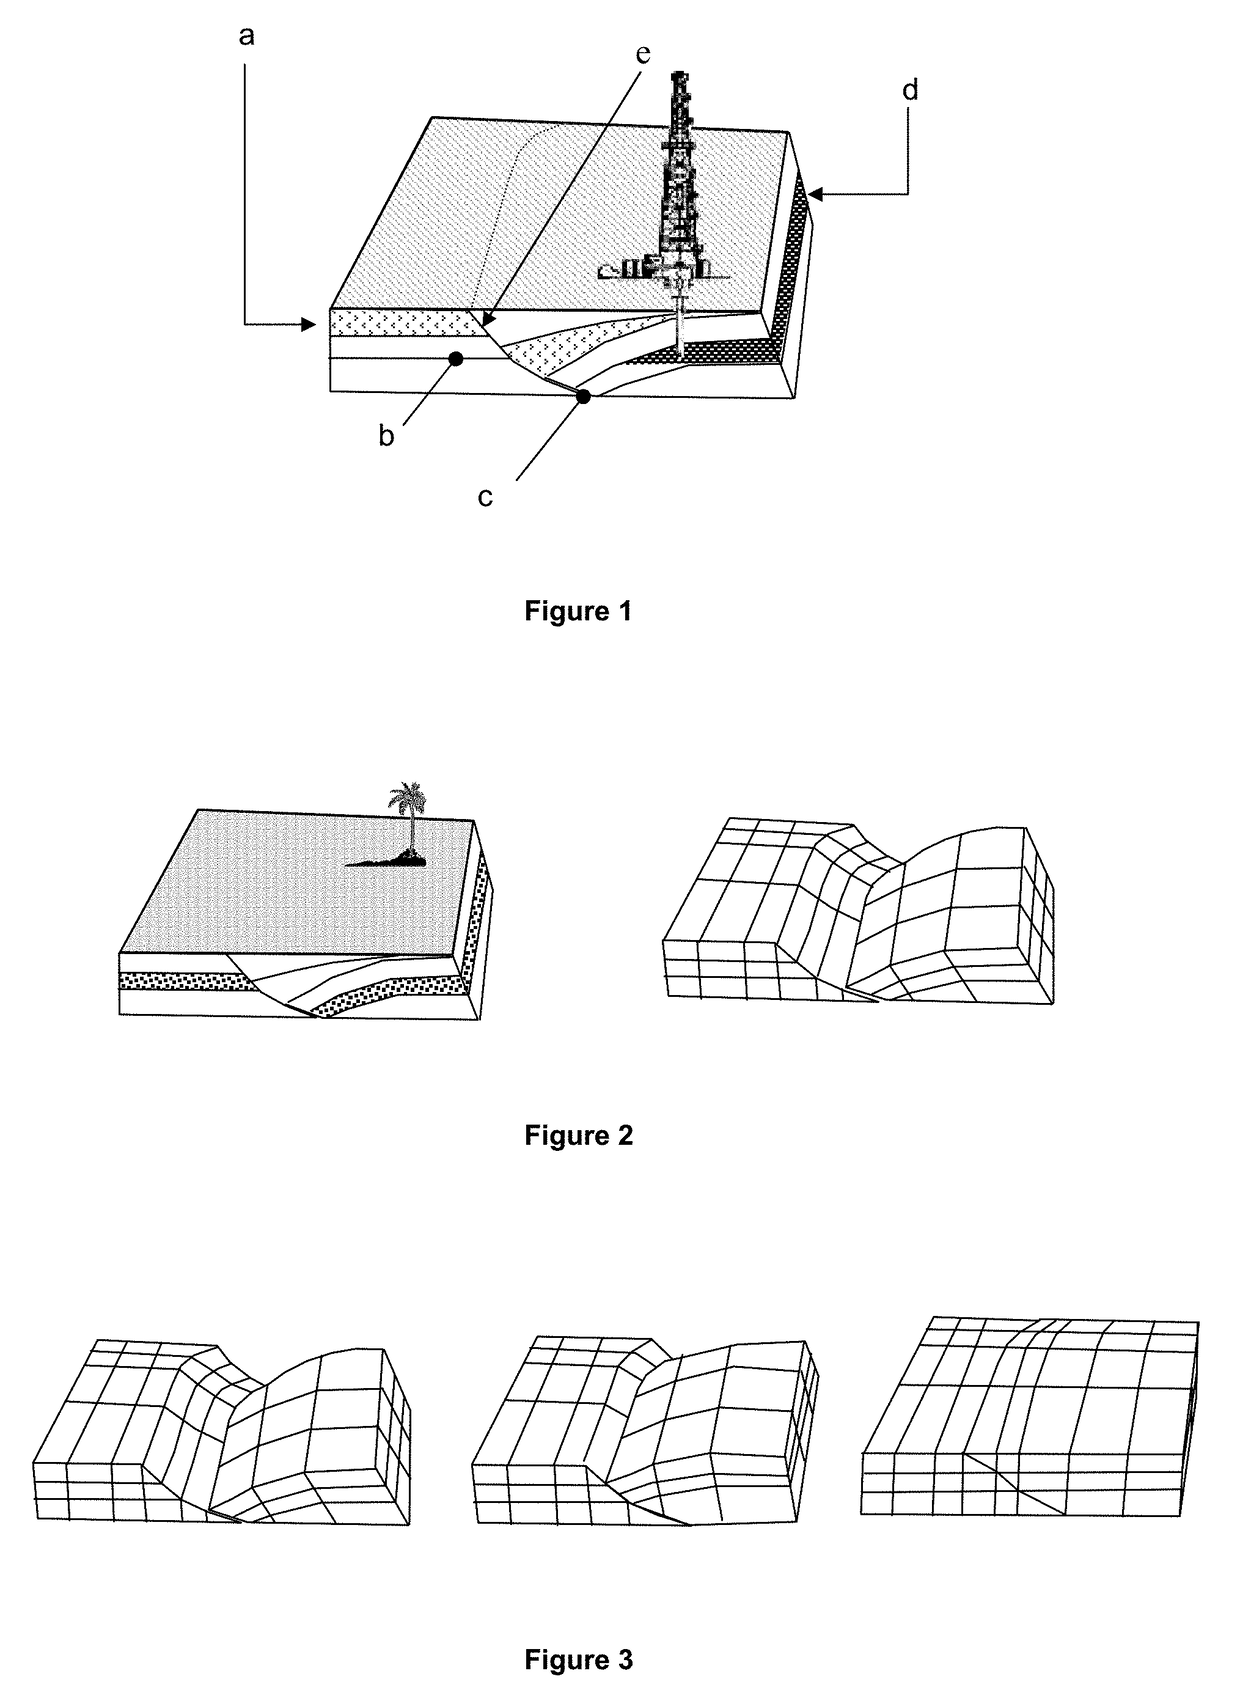 Method for exploitation of hydrocarbons from a sedimentary basin by means of a basin simulation taking account of geomechanical effects